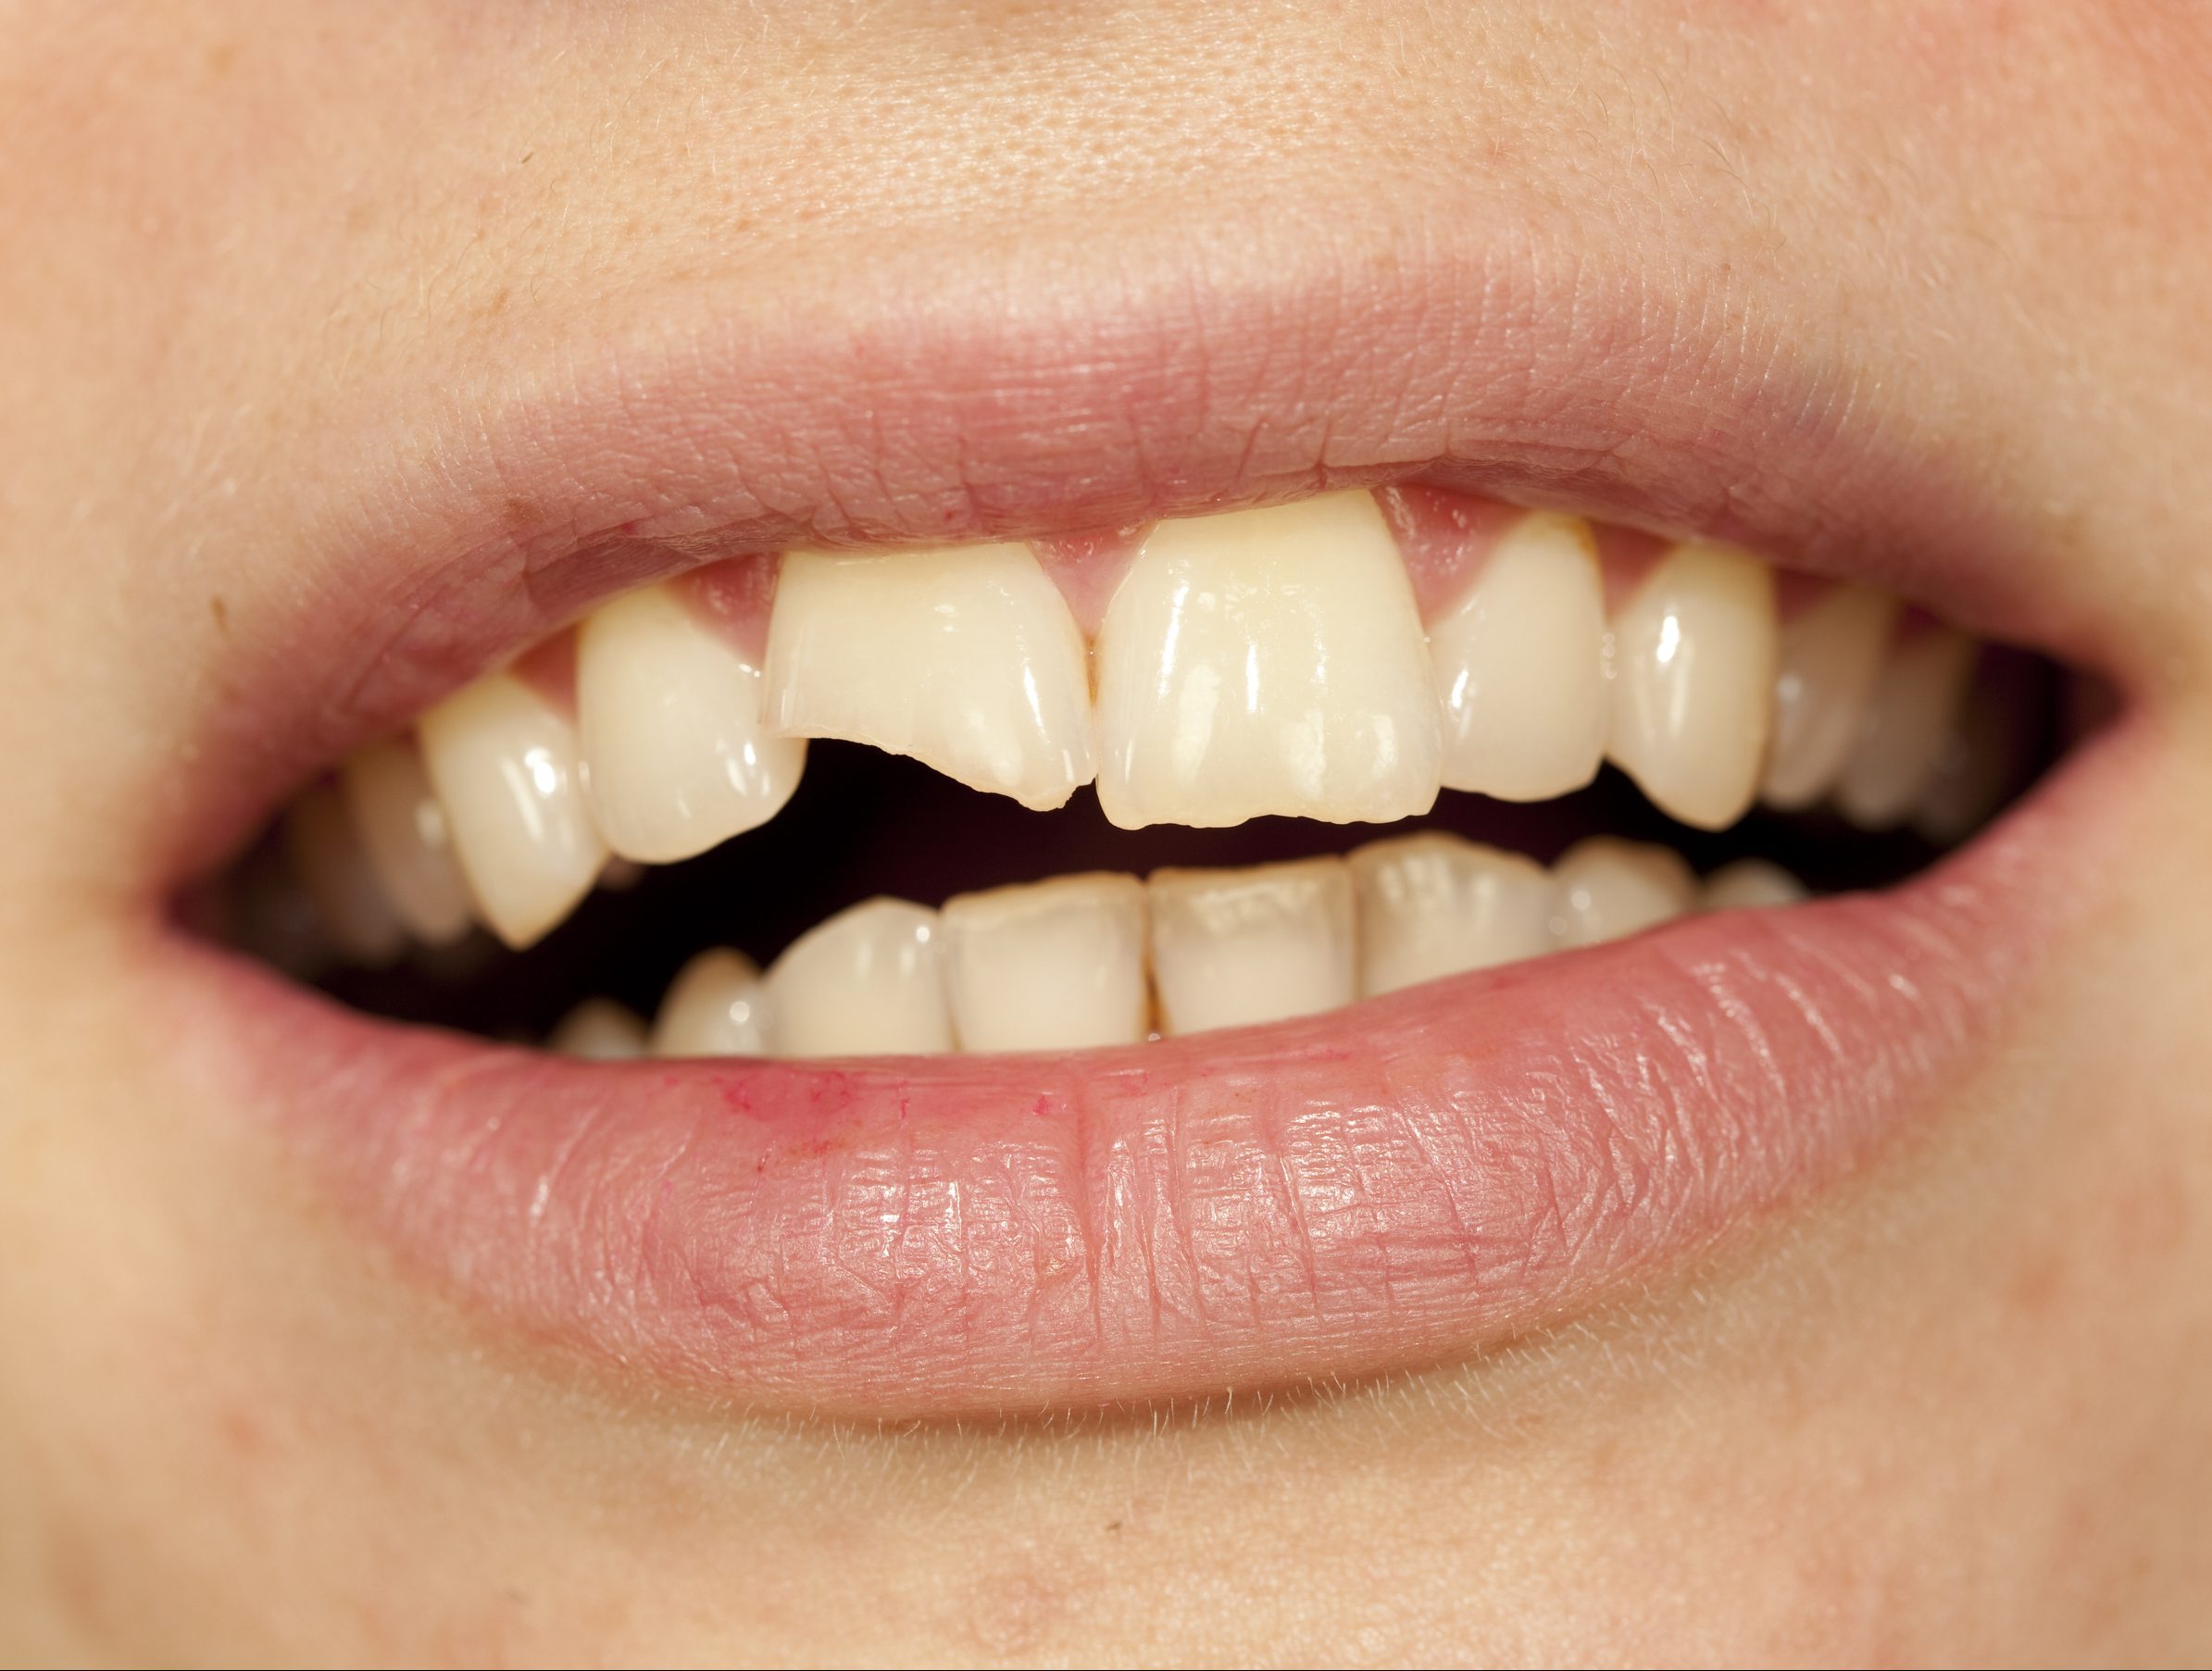 Oral Piercings And Oral Health What You Should Know Dental Implants 